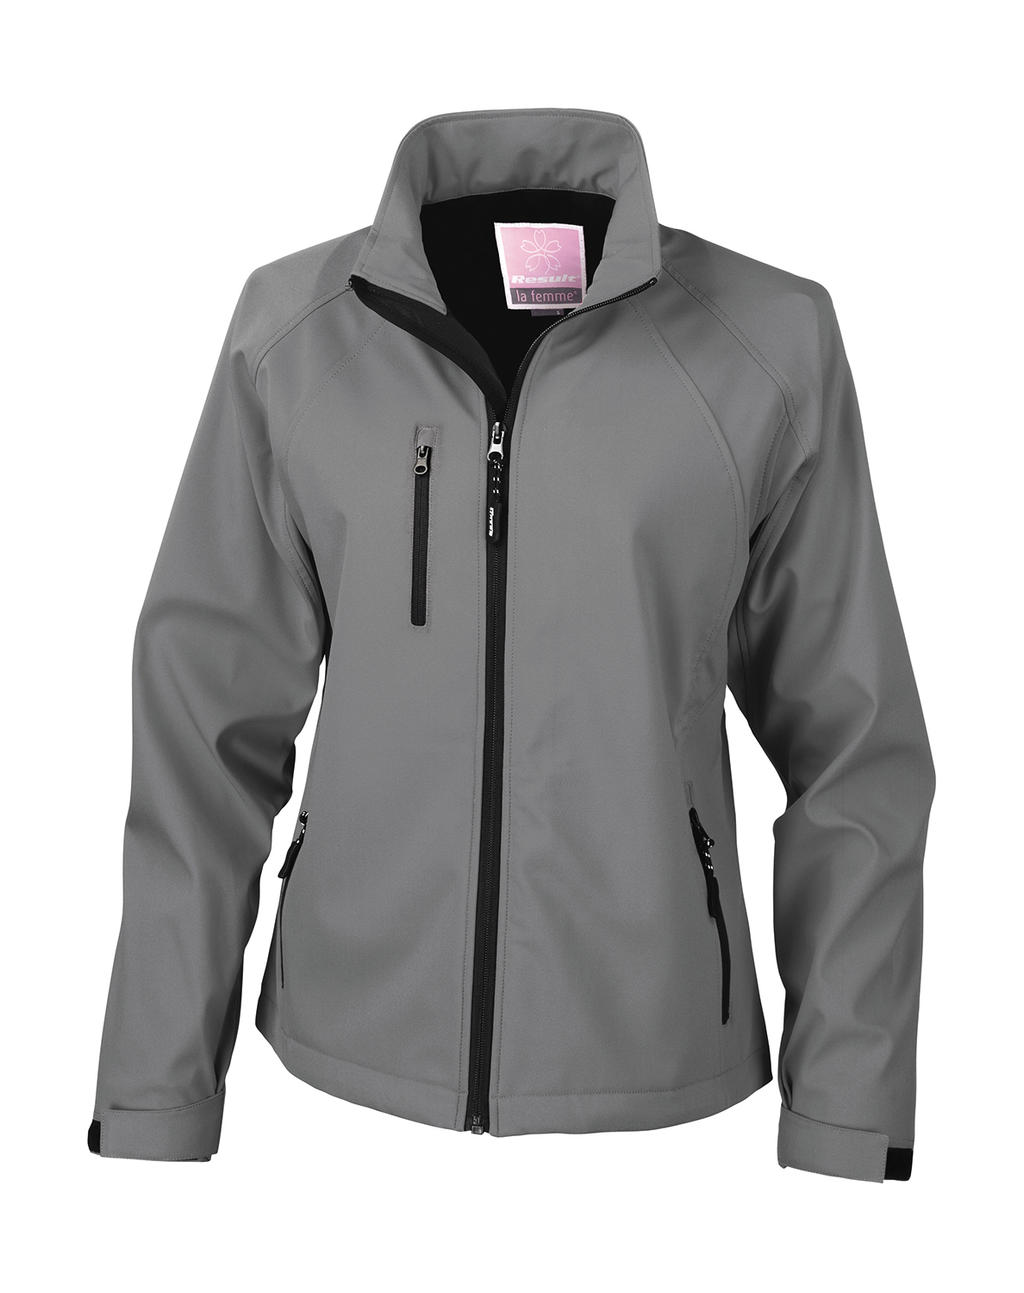  Ladies Base Layer Softshell in Farbe Silver Grey